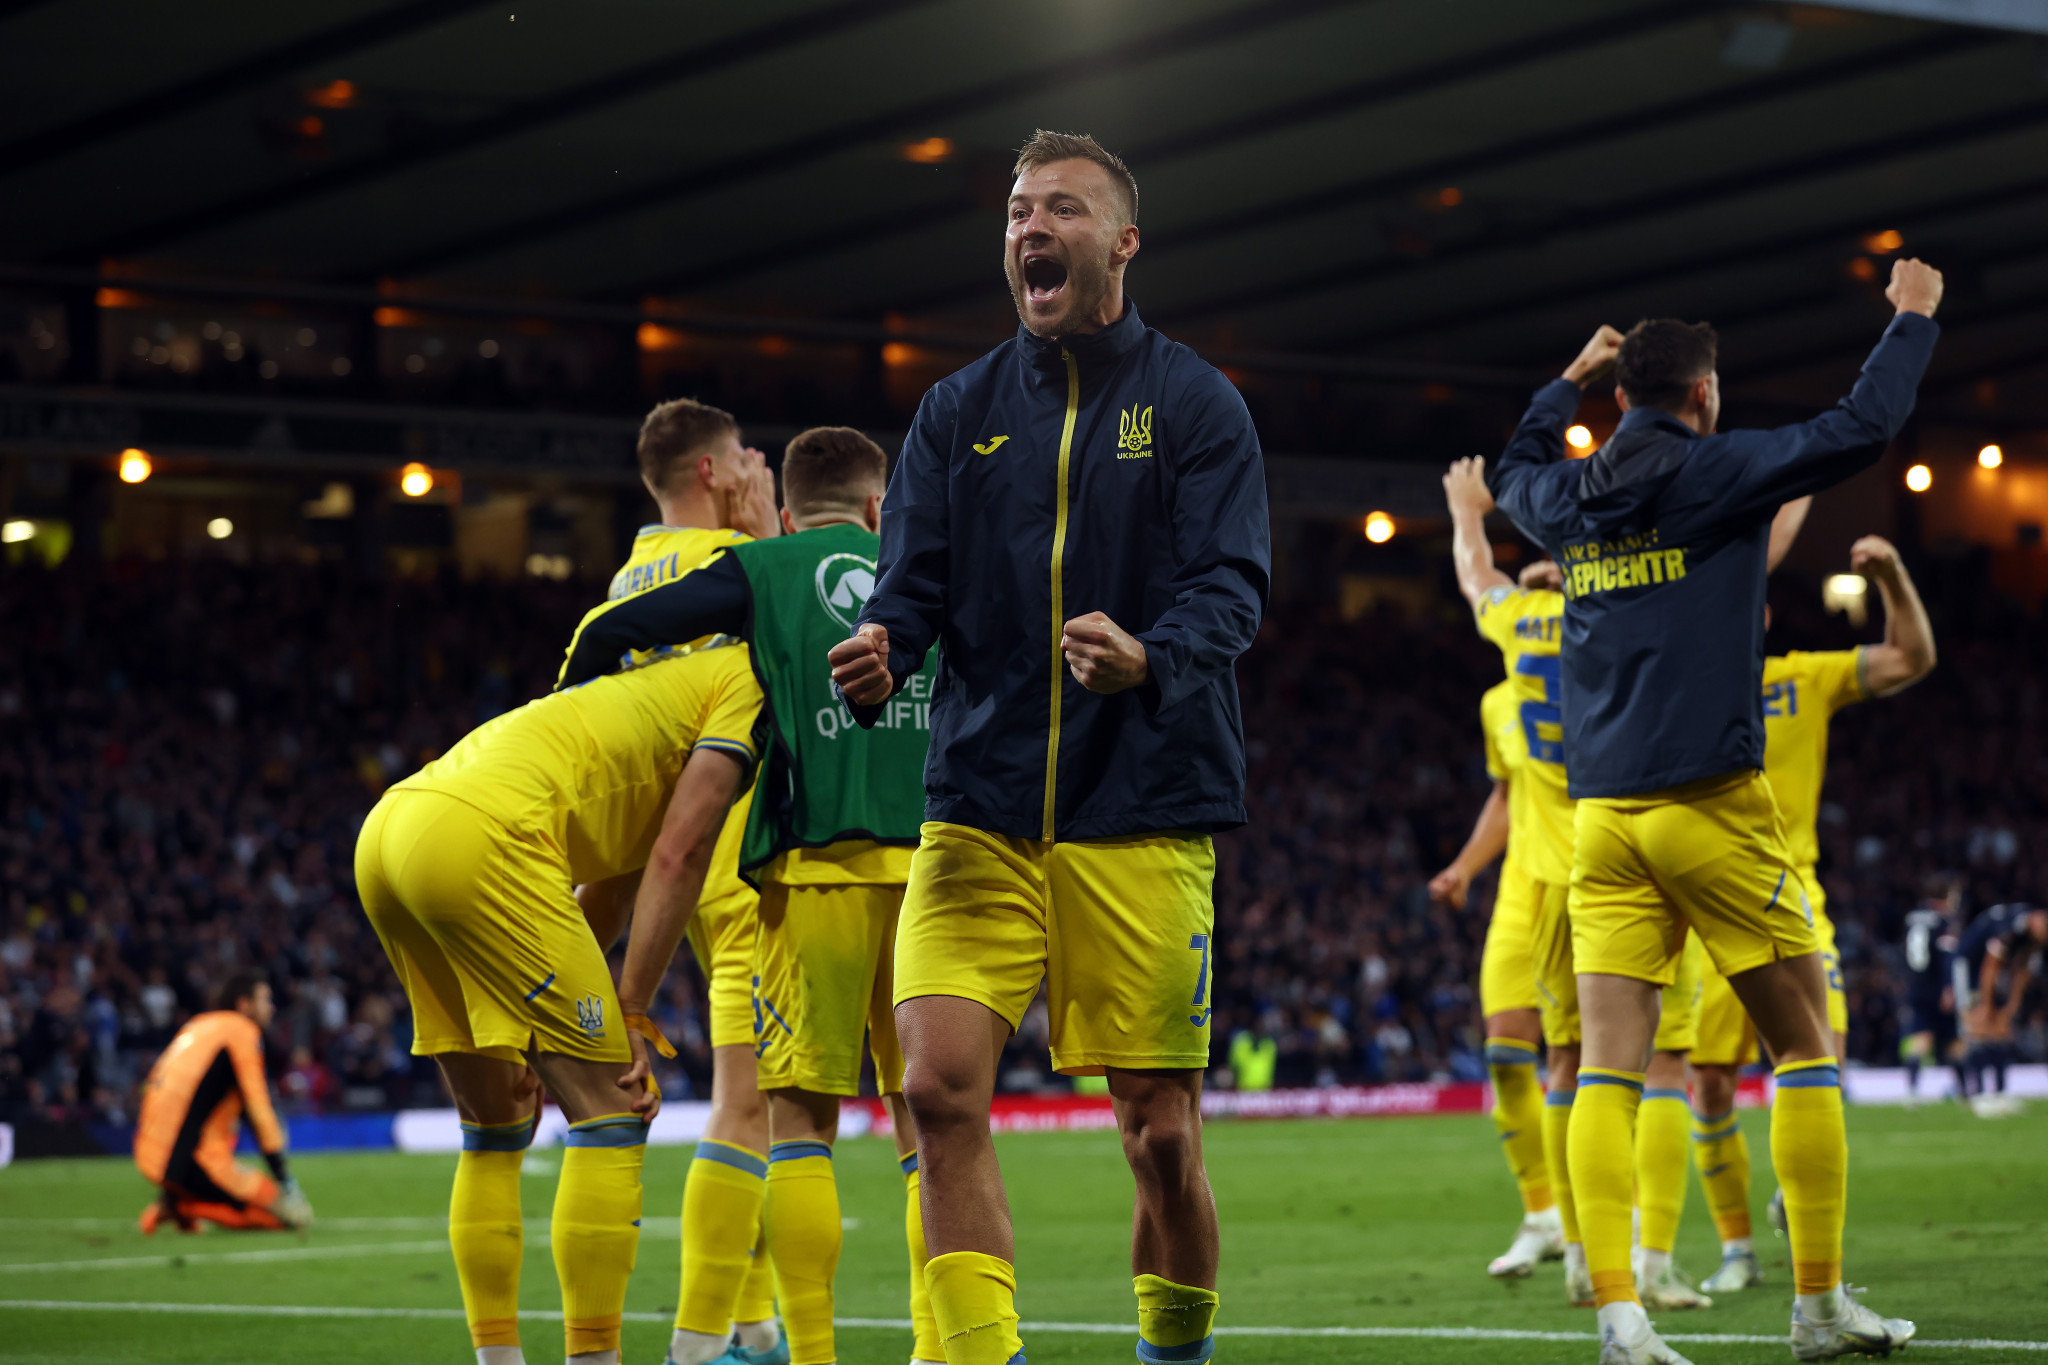 Ukraine's men's national team clinched an impressive 3-1 victory away to Scotland in the playoff semi-final on their return to competitive football ©Getty Images